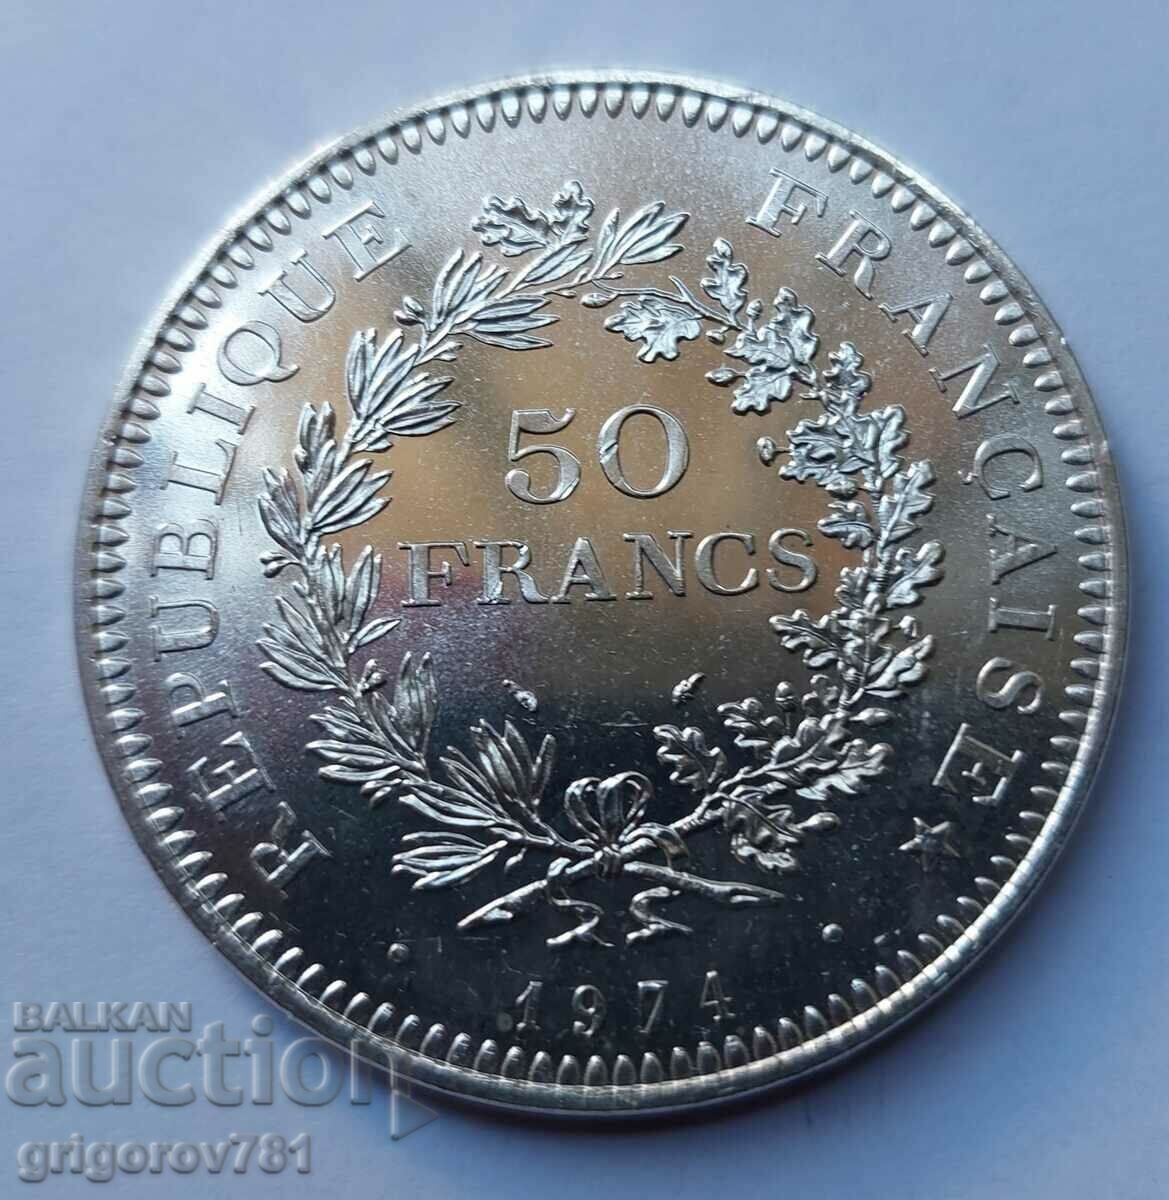 50 Francs Silver France 1974 - Silver Coin #27